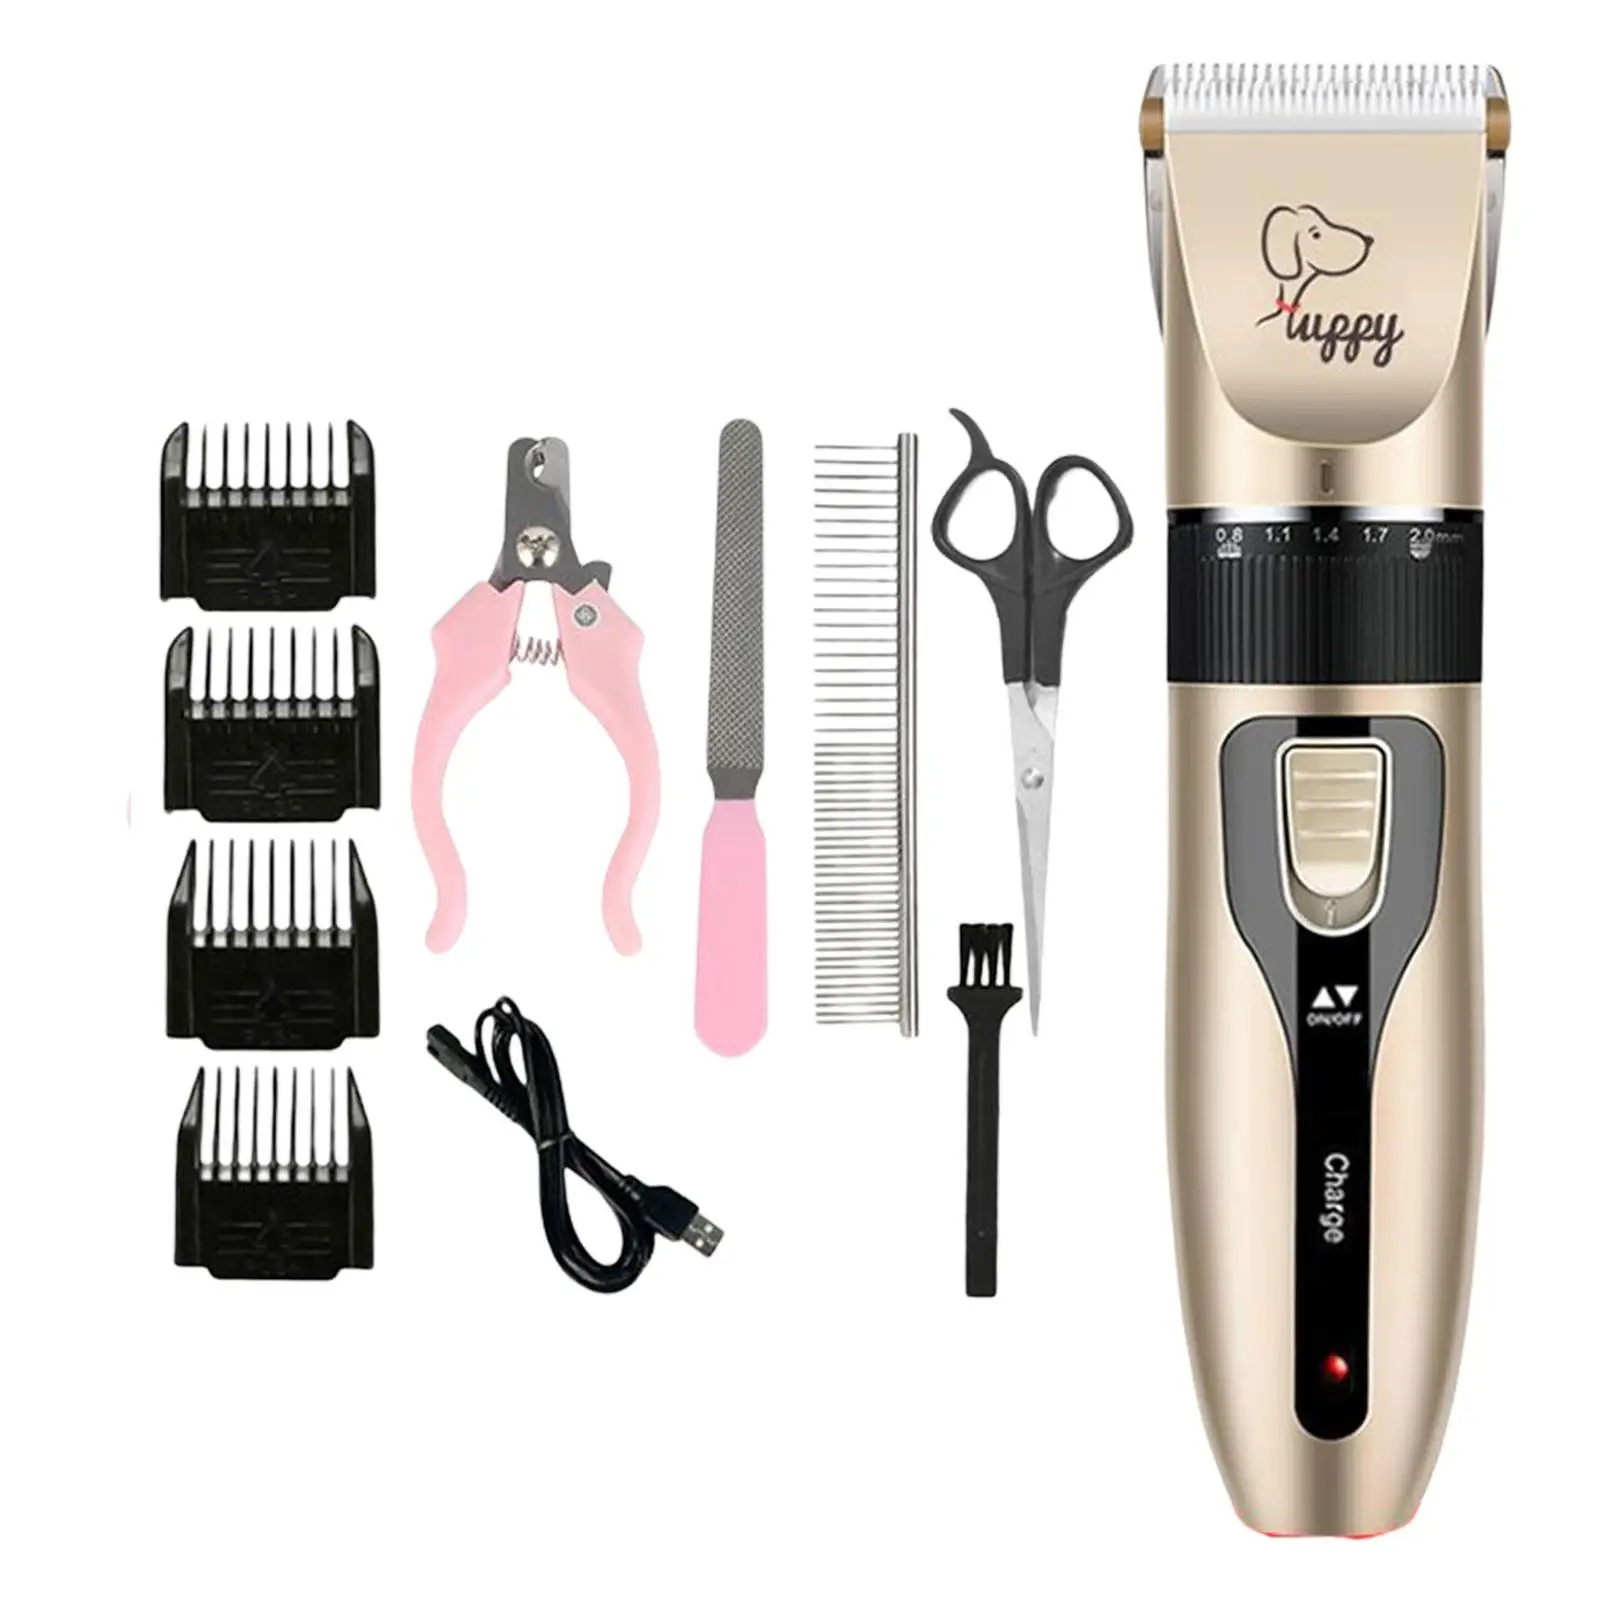 Electric Pet Grooming Kit for Small Medium Large Dogs Cats Pet Hair Trimmer Set Grooming Tool Professional Dog Hair Clippers